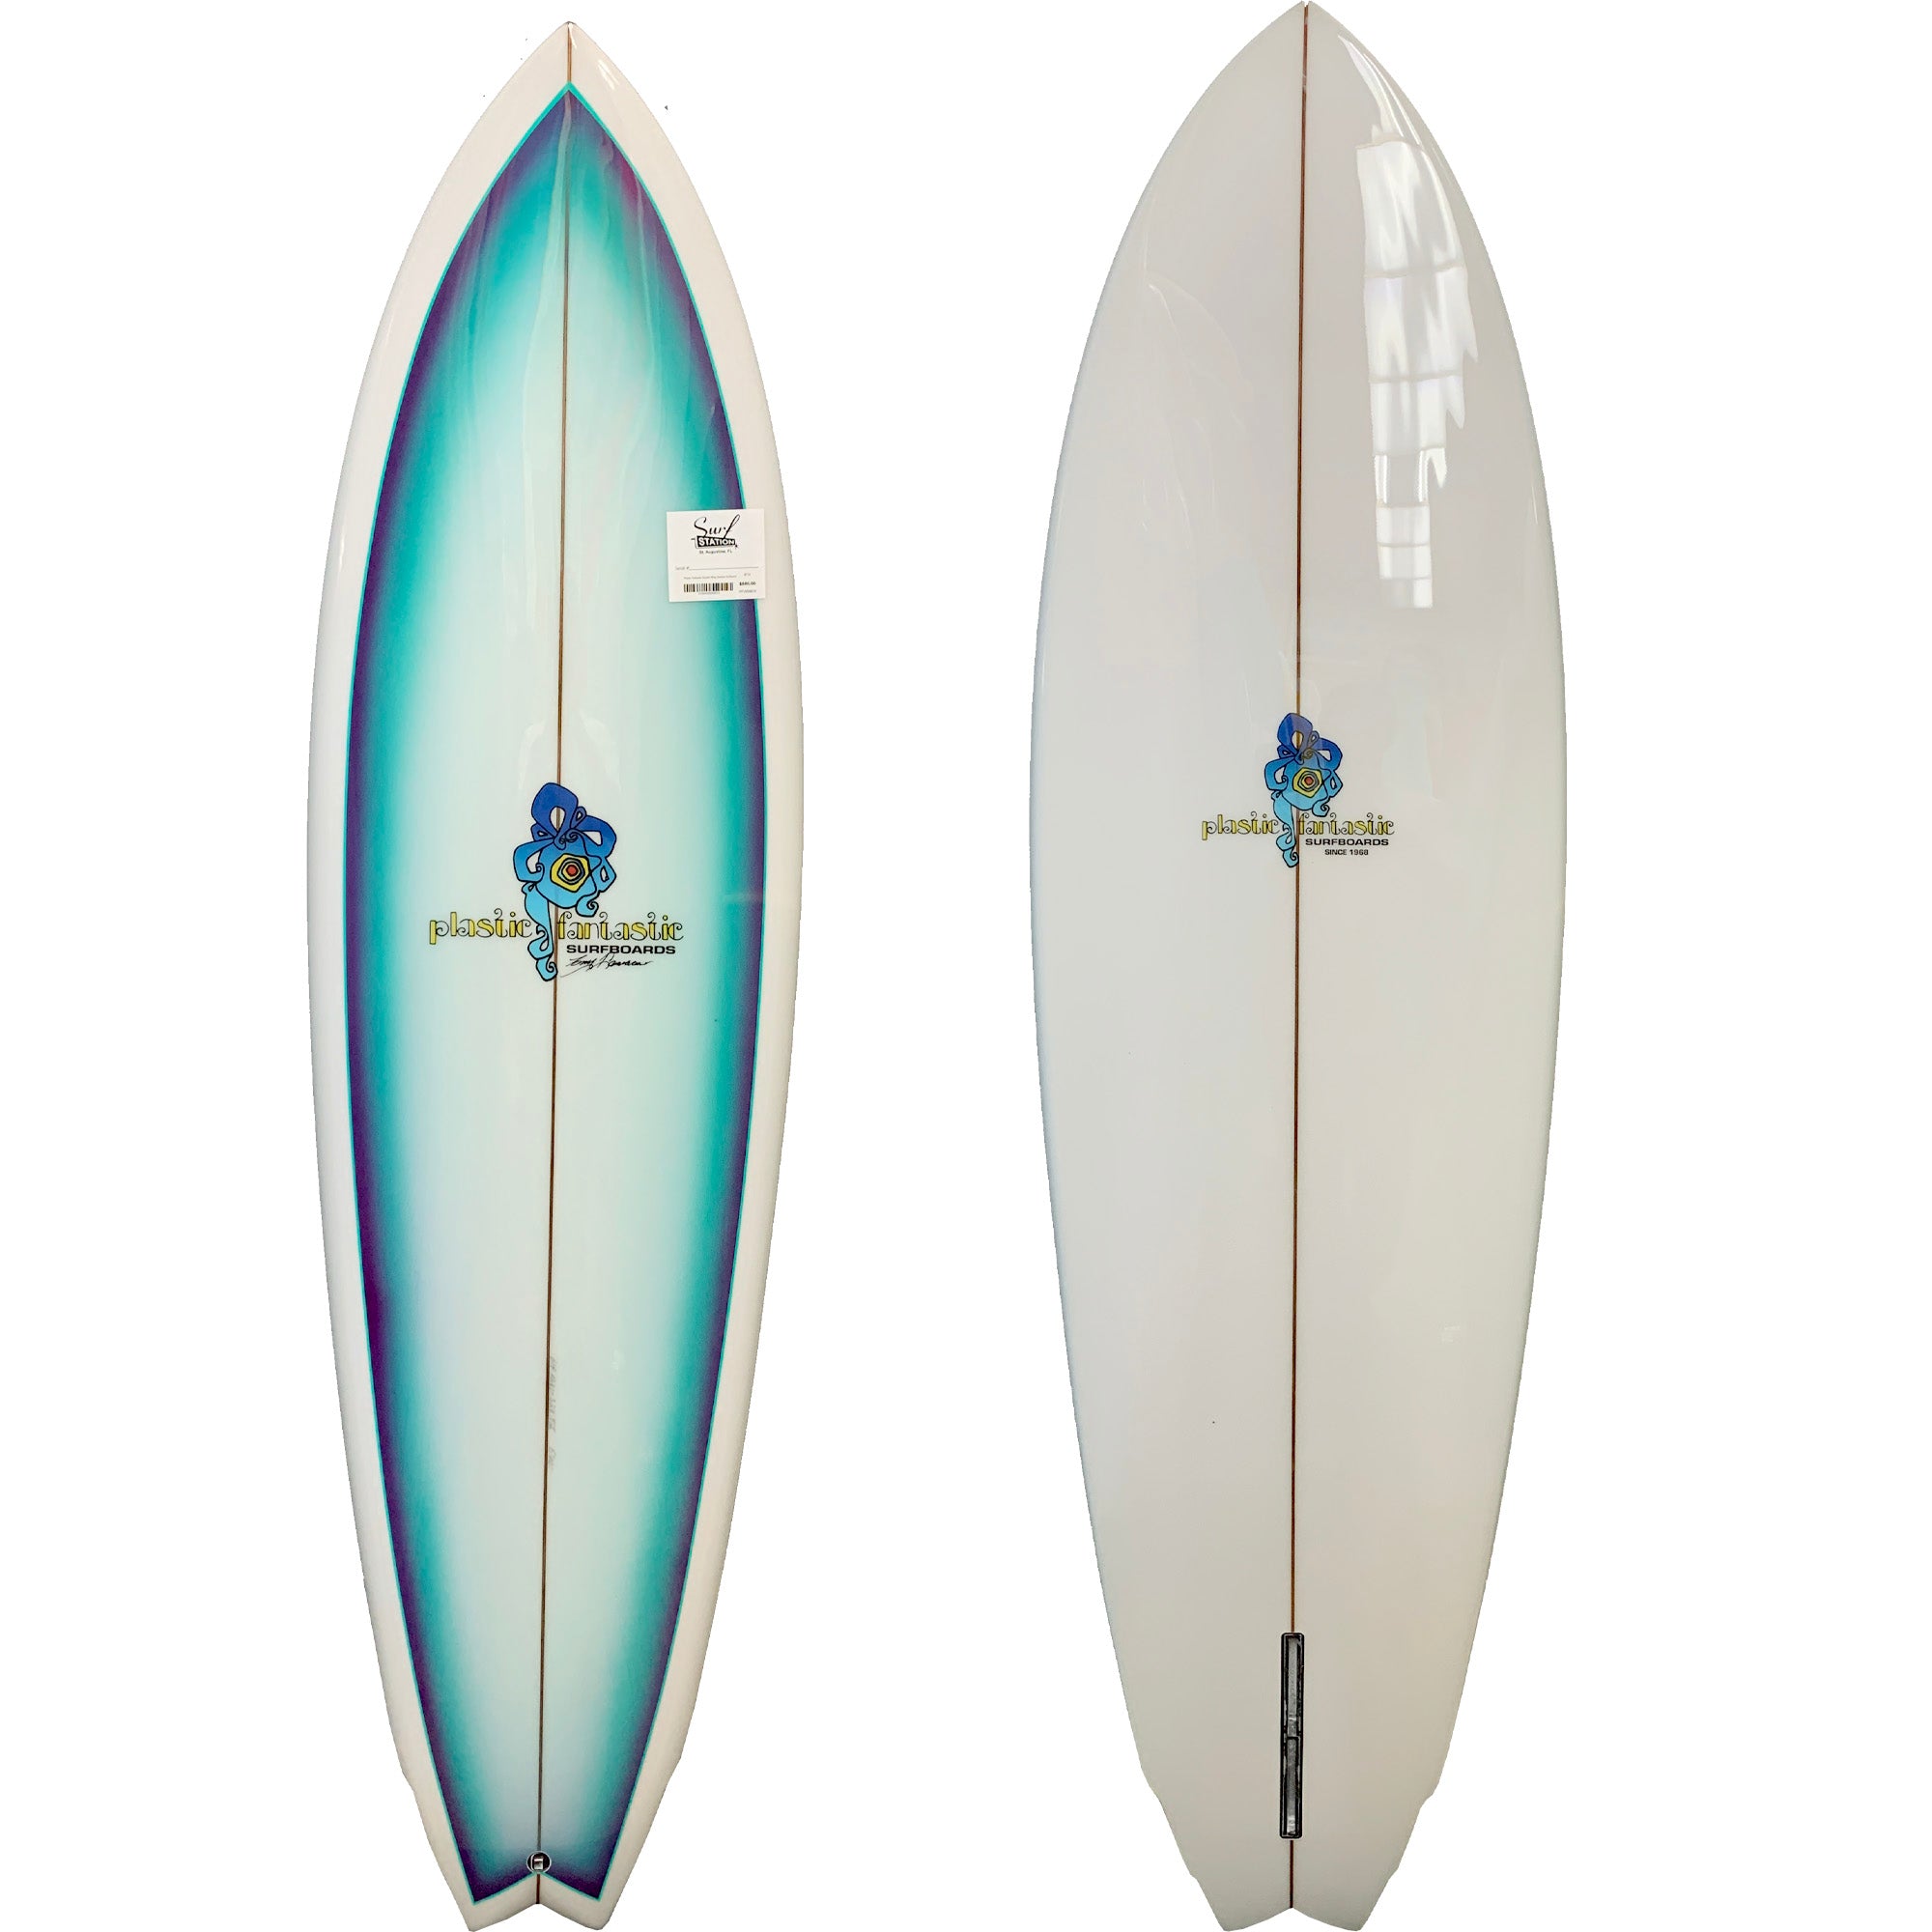 Plastic Fantastic Double Wing Swallow Surfboard - Surf Station Store